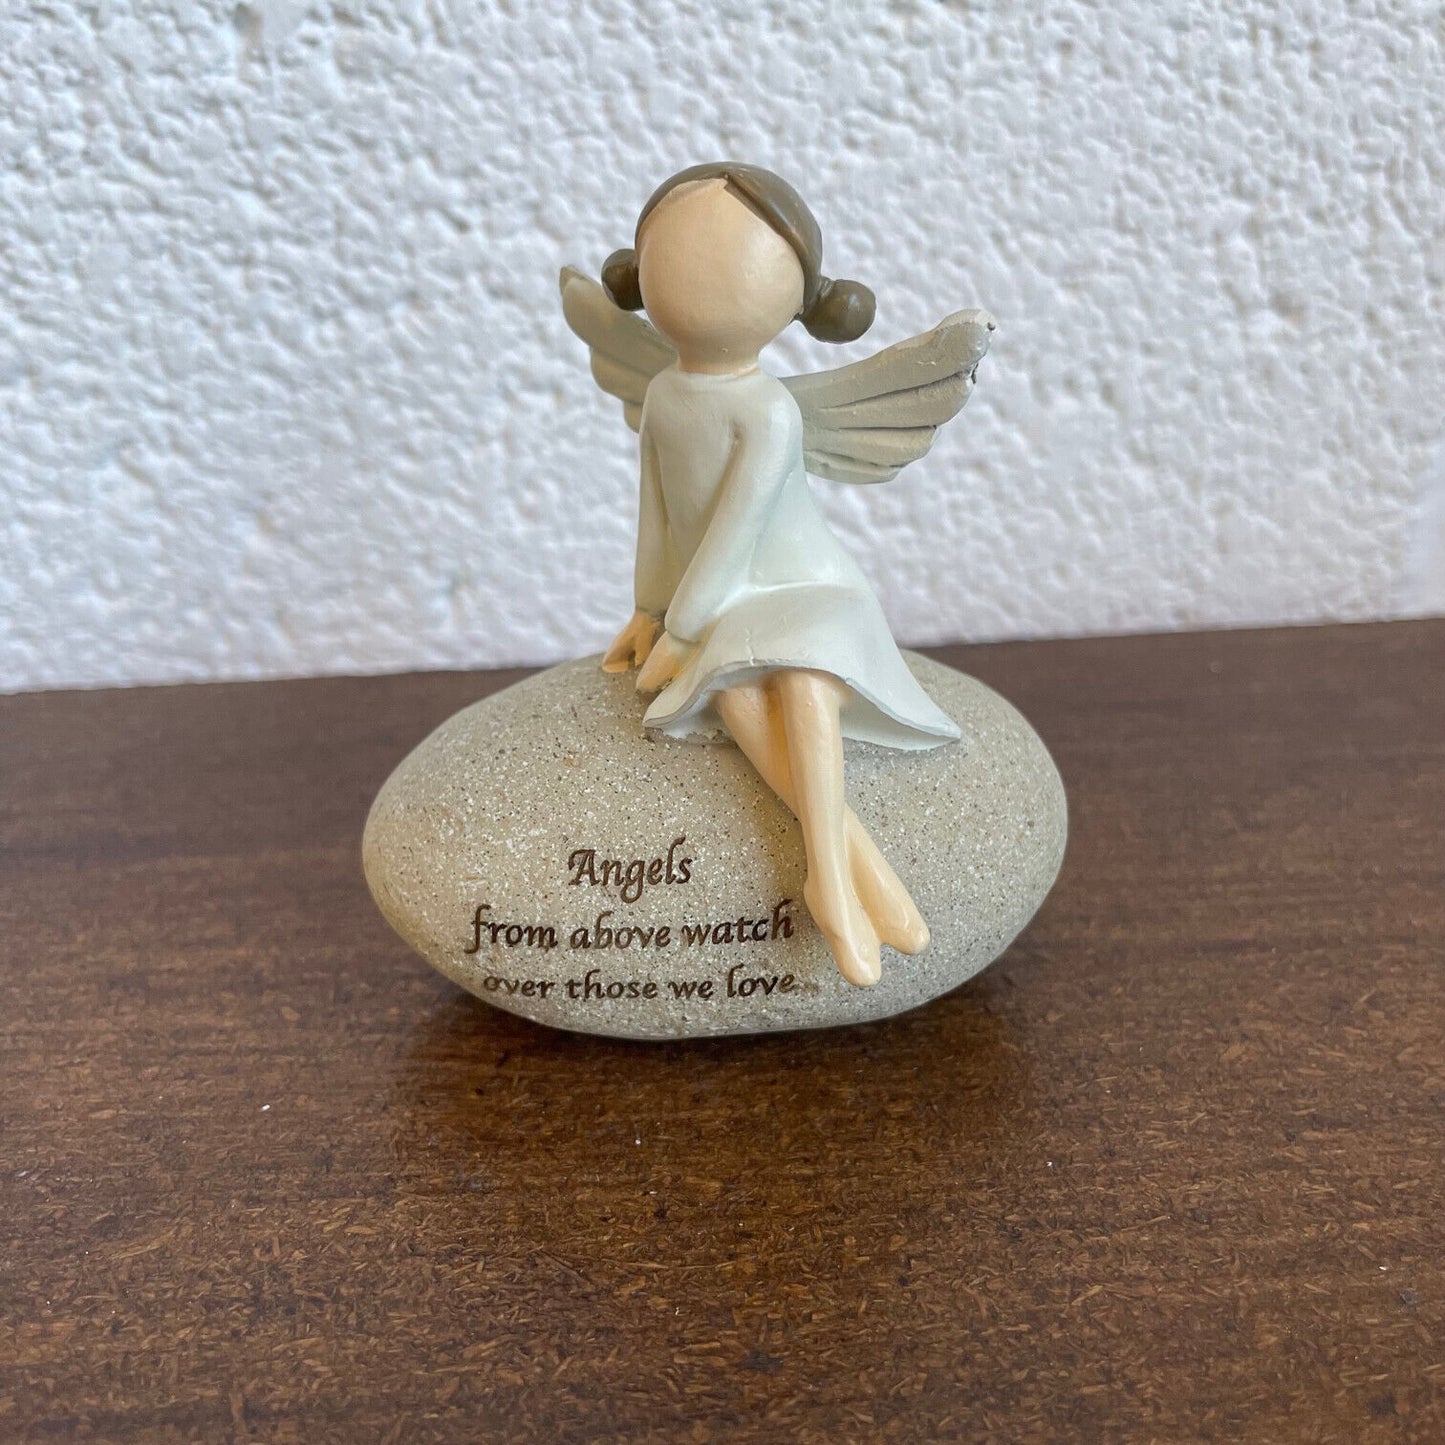 Angels From Above Watch Over Those We Love Sentimental Pebble Gift